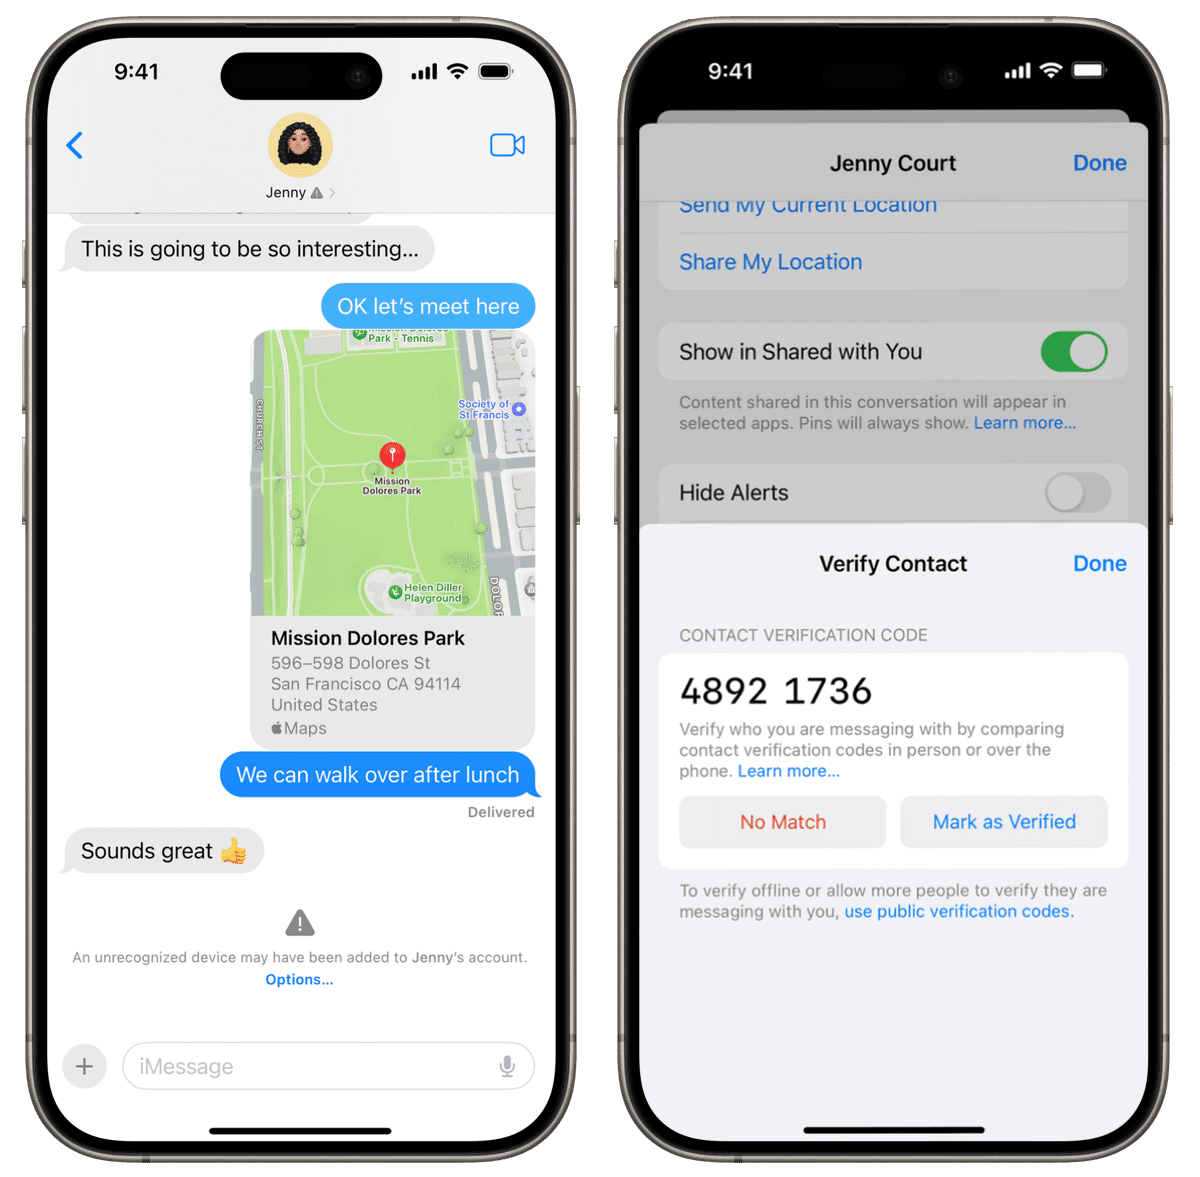 The iPhone on the left displays a contact key verification error in the Messages conversation. The iPhone on the right shows a verification code that users can compare to verify they are messaging with whom they intend.